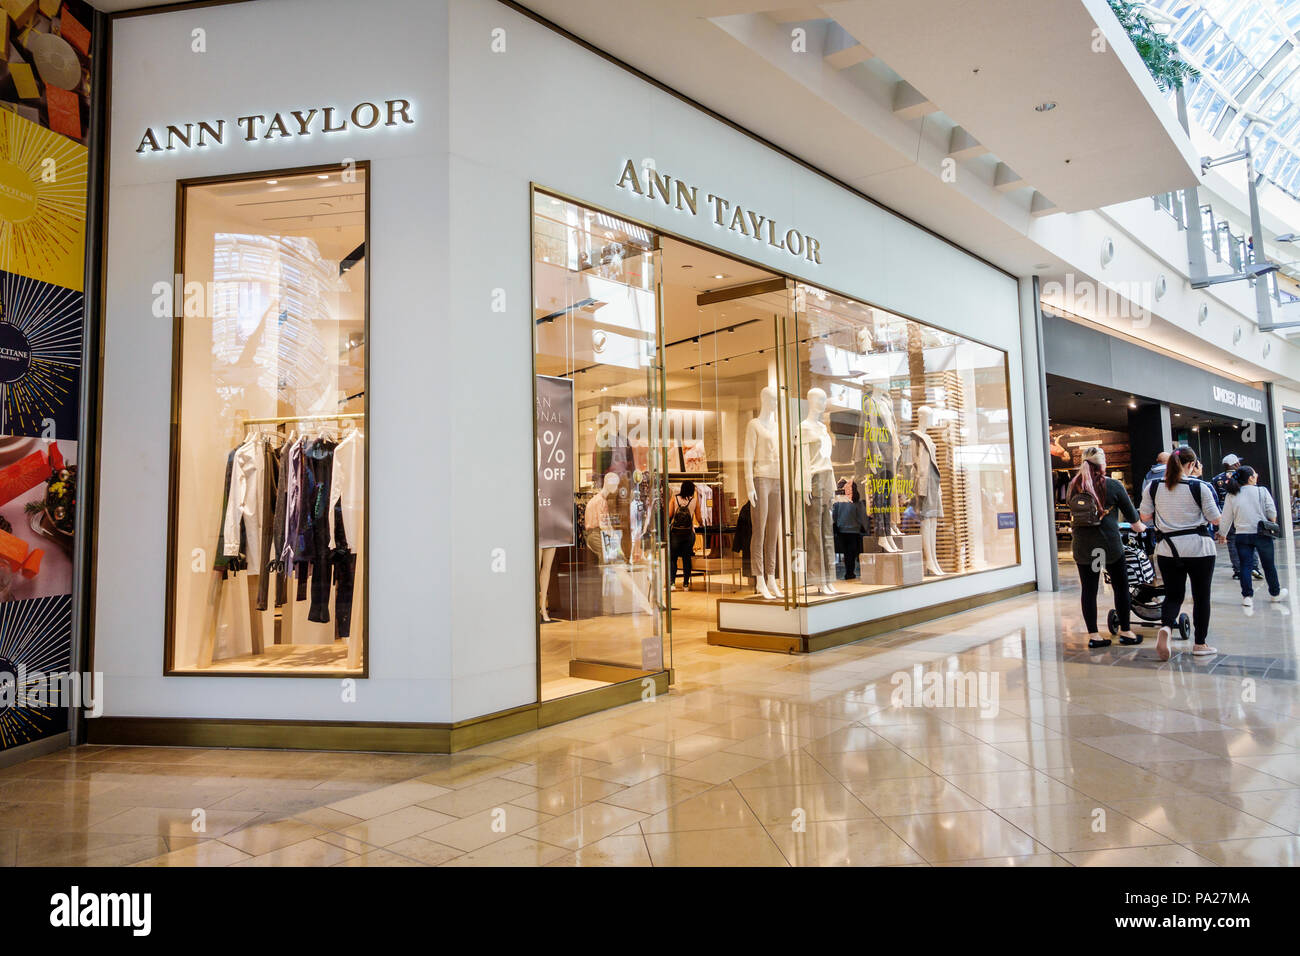 Zaailing steenkool ethisch Orlando Florida,The Mall at Millenia,shopping shopper shoppers shop shops  market markets marketplace buying selling,retail store stores business  busin Stock Photo - Alamy